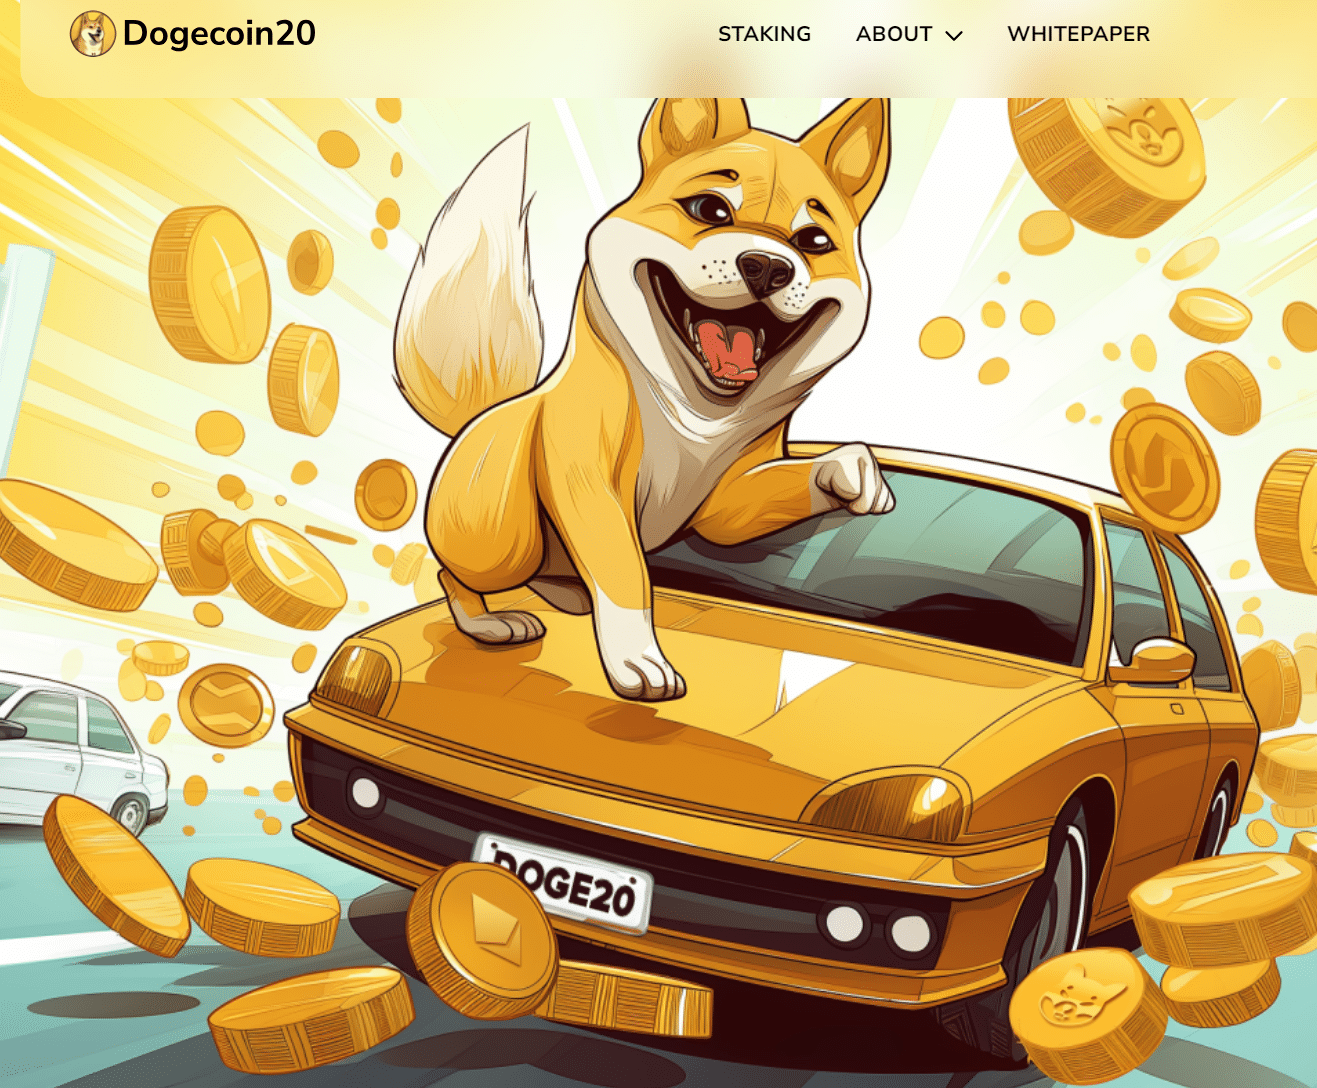 New Cryptocurrency ICO Dogecoin20 Launches With $250,000 Raised On Day One – Next Big Meme Coin?